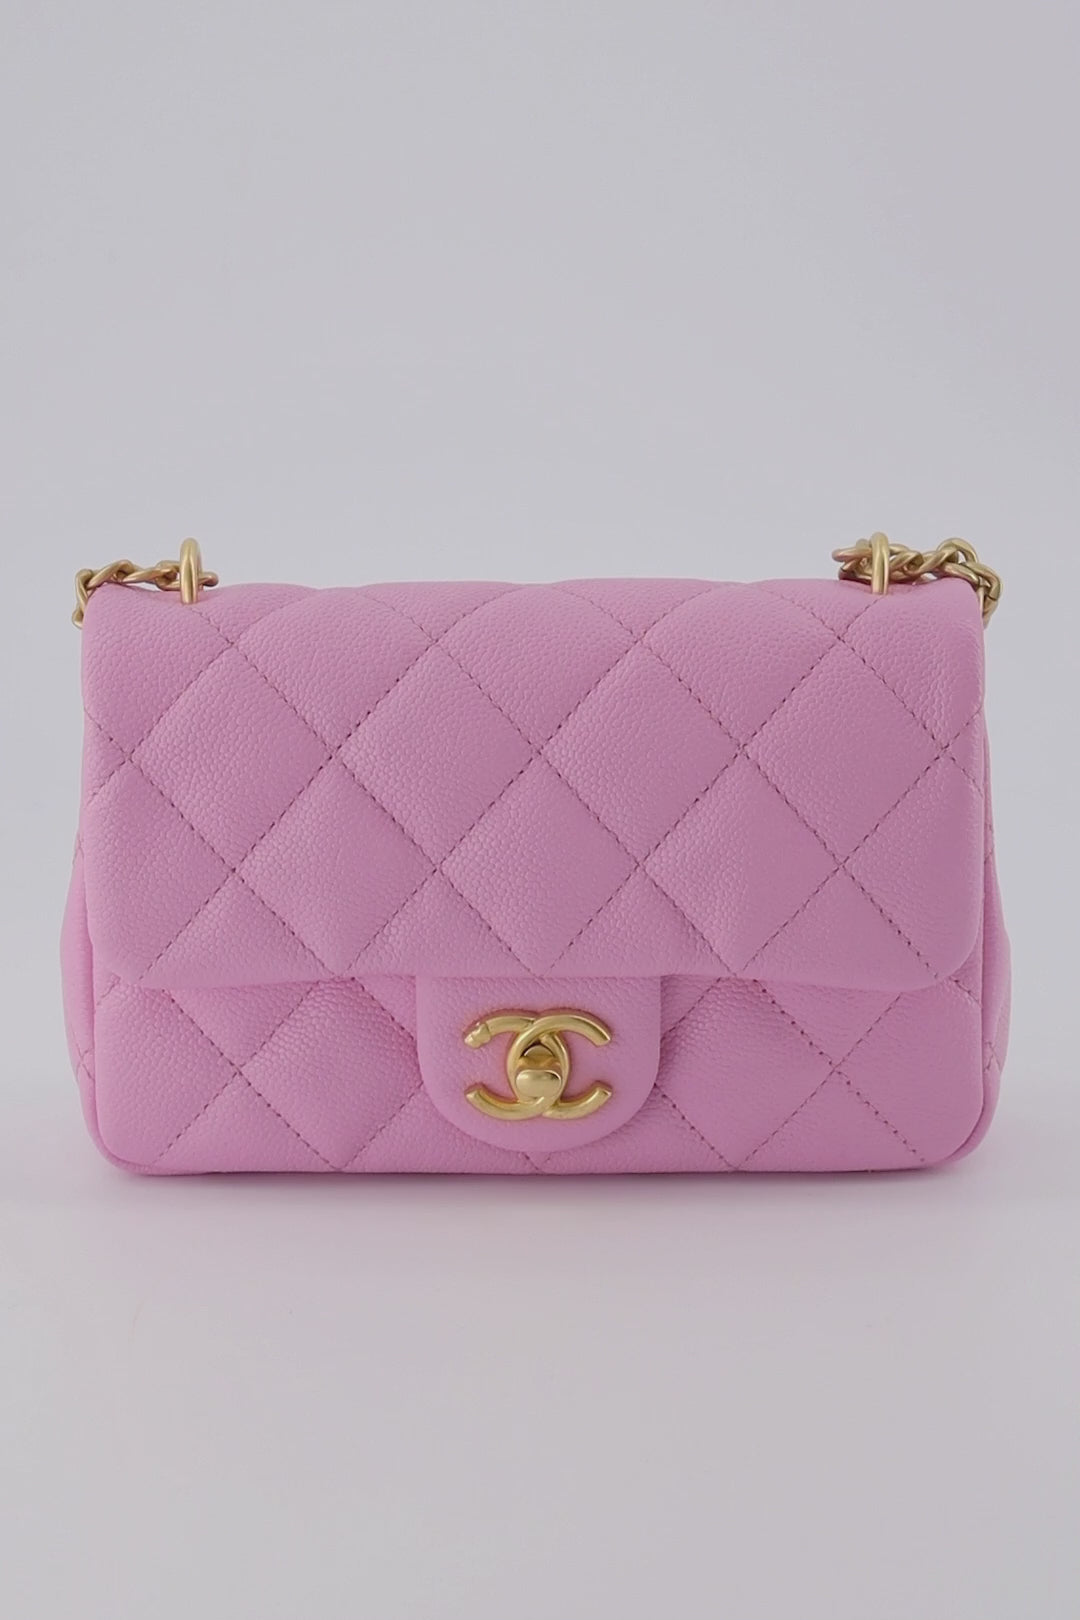 Chanel Pink Caviar Leather flap Wallet Chanel